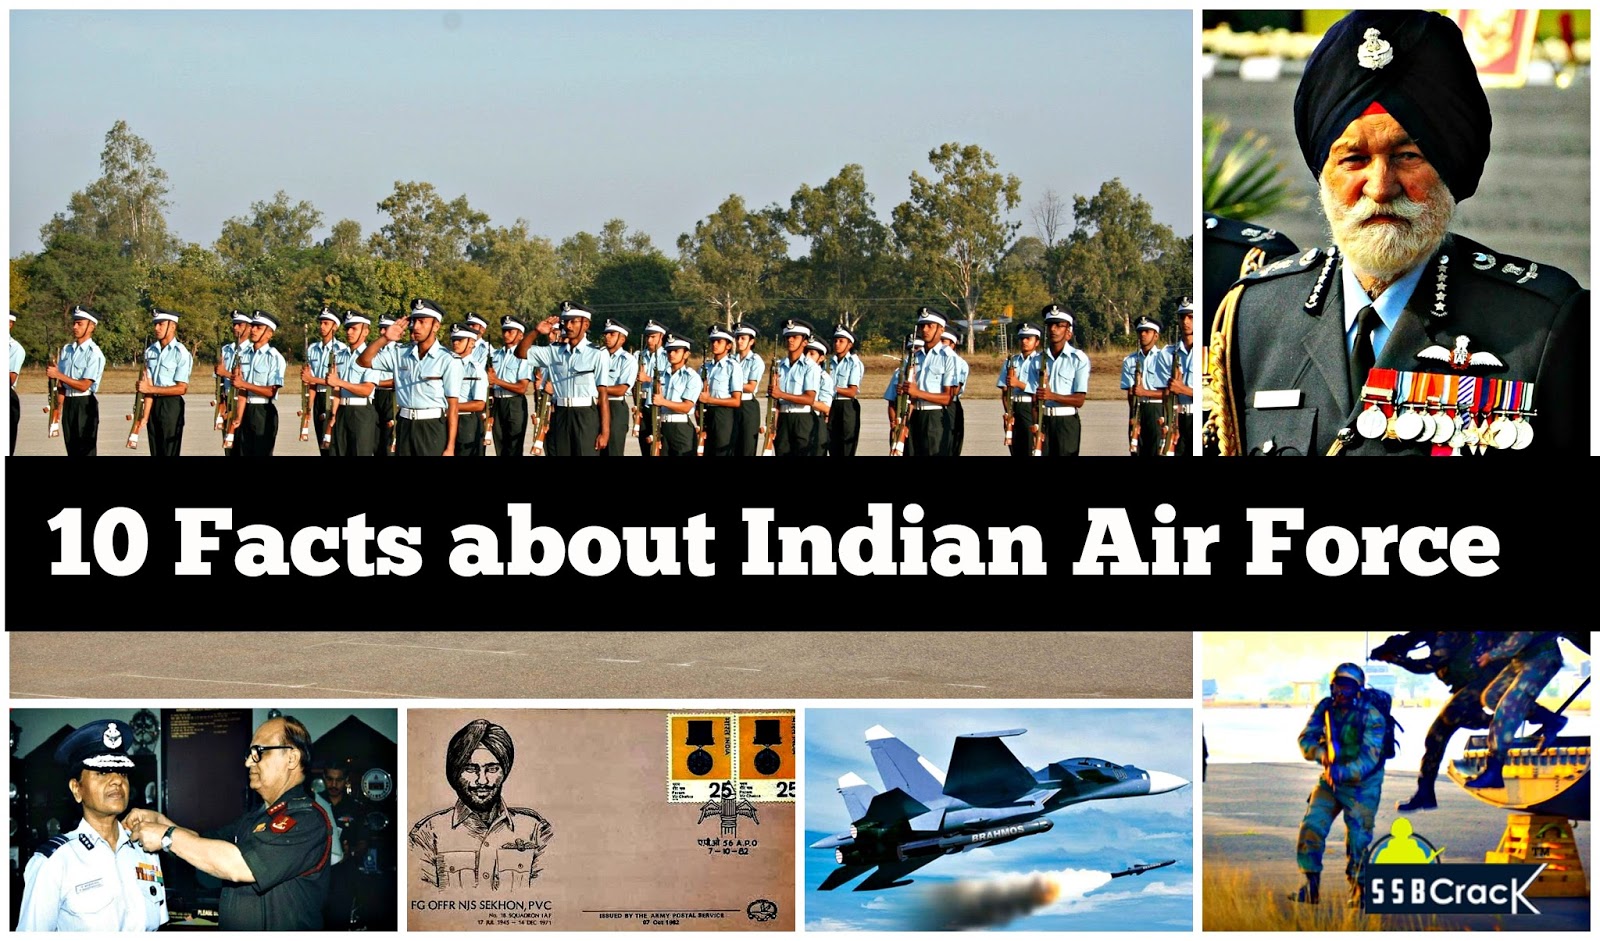 10 Facts about Indian Air Force